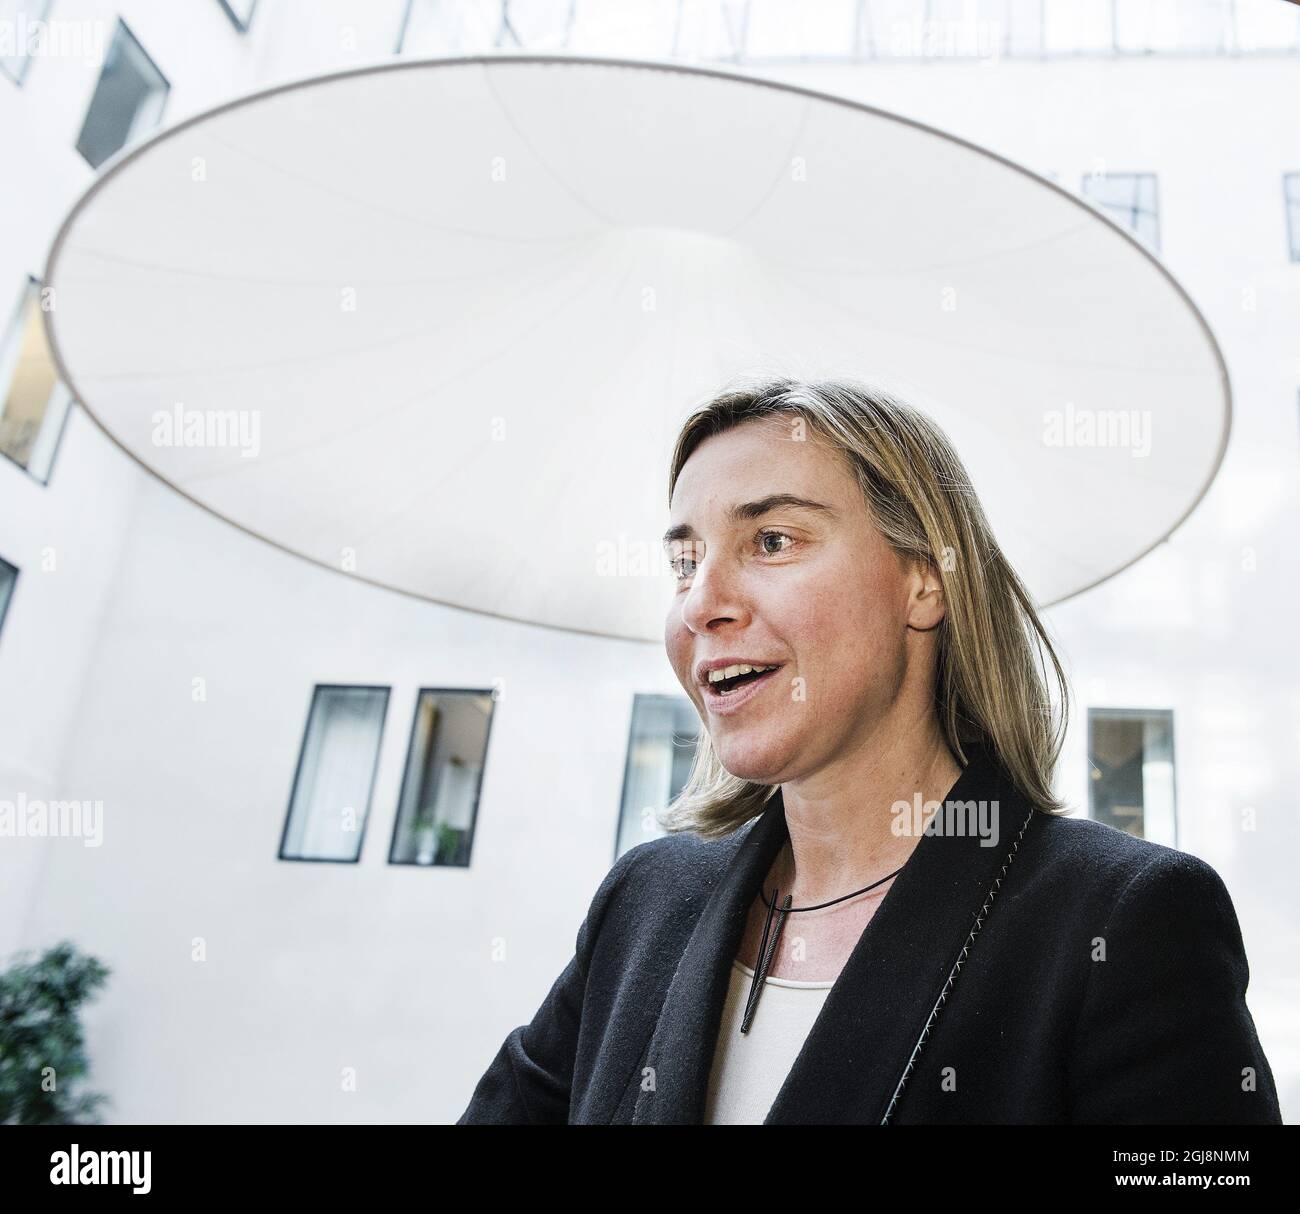 STOCKHOLM FILE 2014-04-10 Federica Mogherini, the 41-year-old Italian minister for foreign affairs, will be the next EU foreign affairs chief . Picture here during a visit to Stockholm in April 2014. Foto: Tomas Oneborg / SvD / TT / Kod 30142  Stock Photo